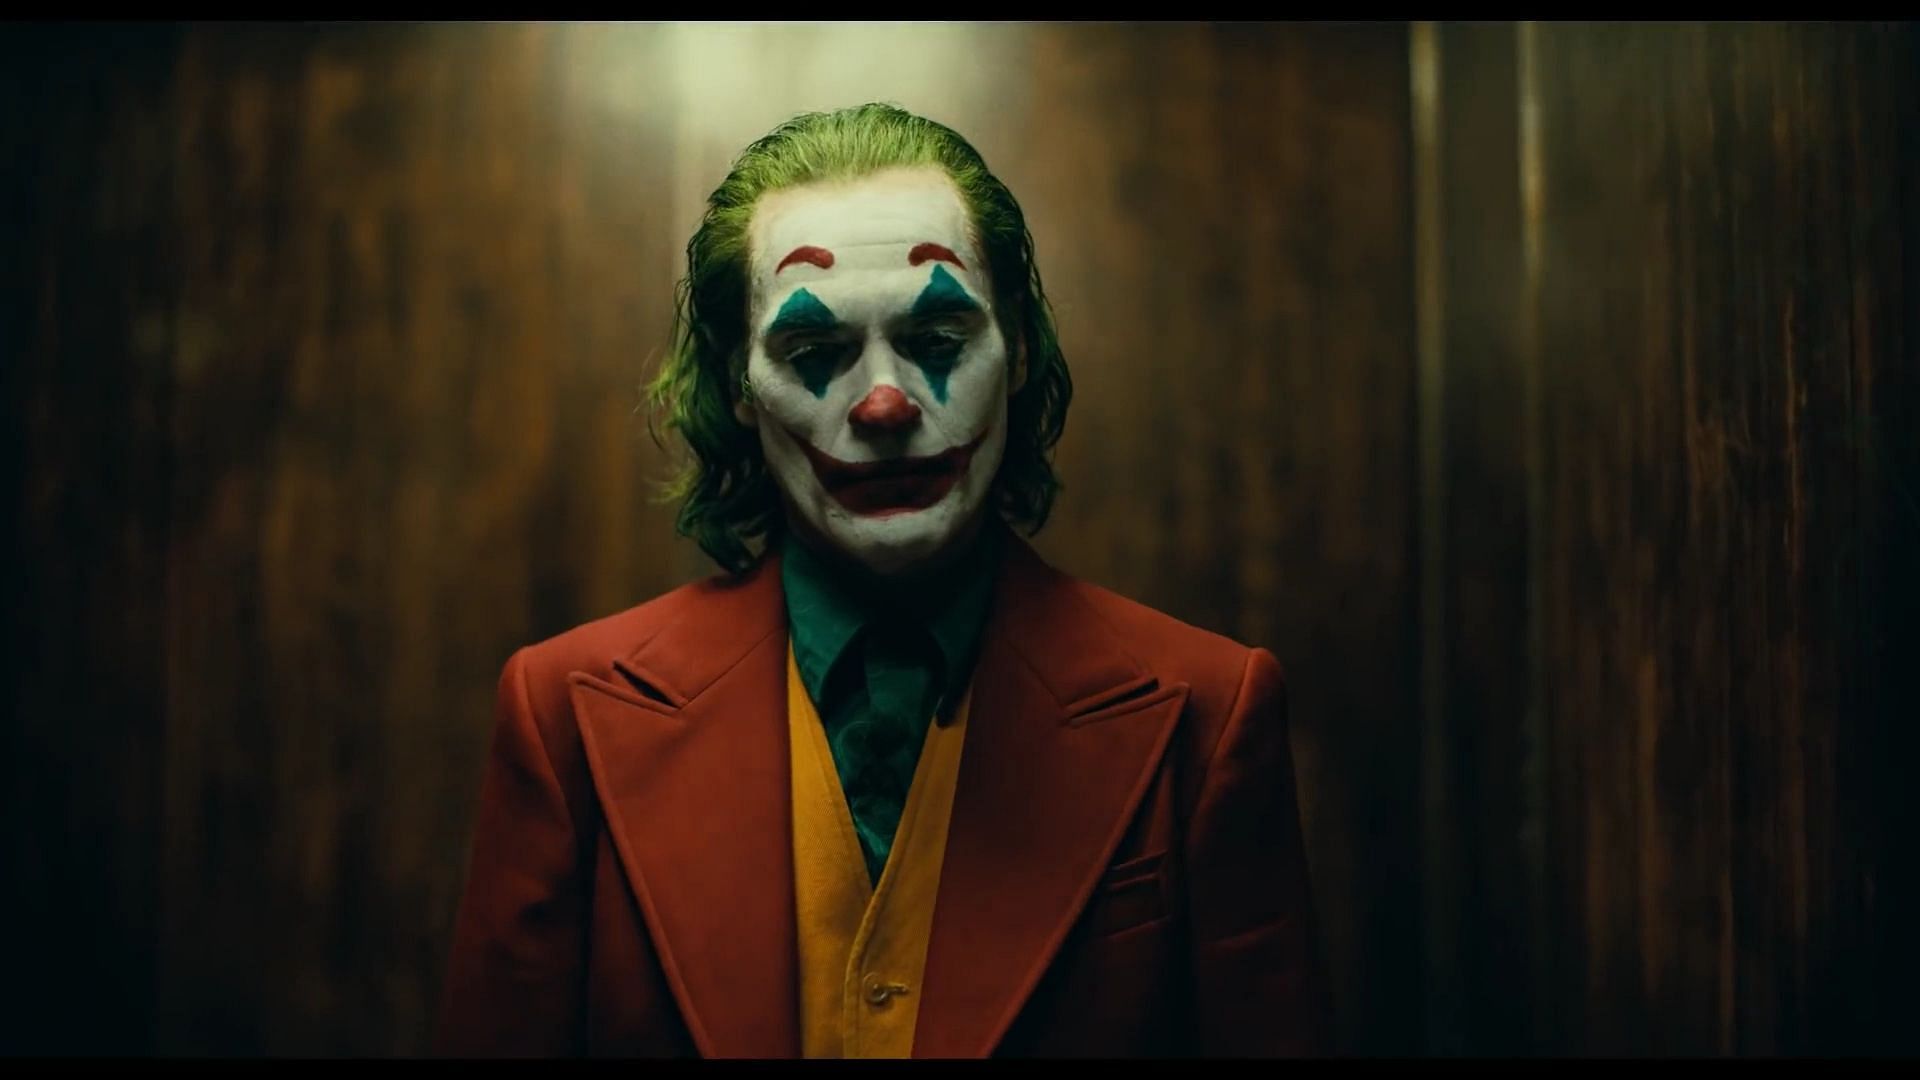 The Joker, the Clown Prince of Crime, revels in chaos and destruction (Image via Warner Bros)